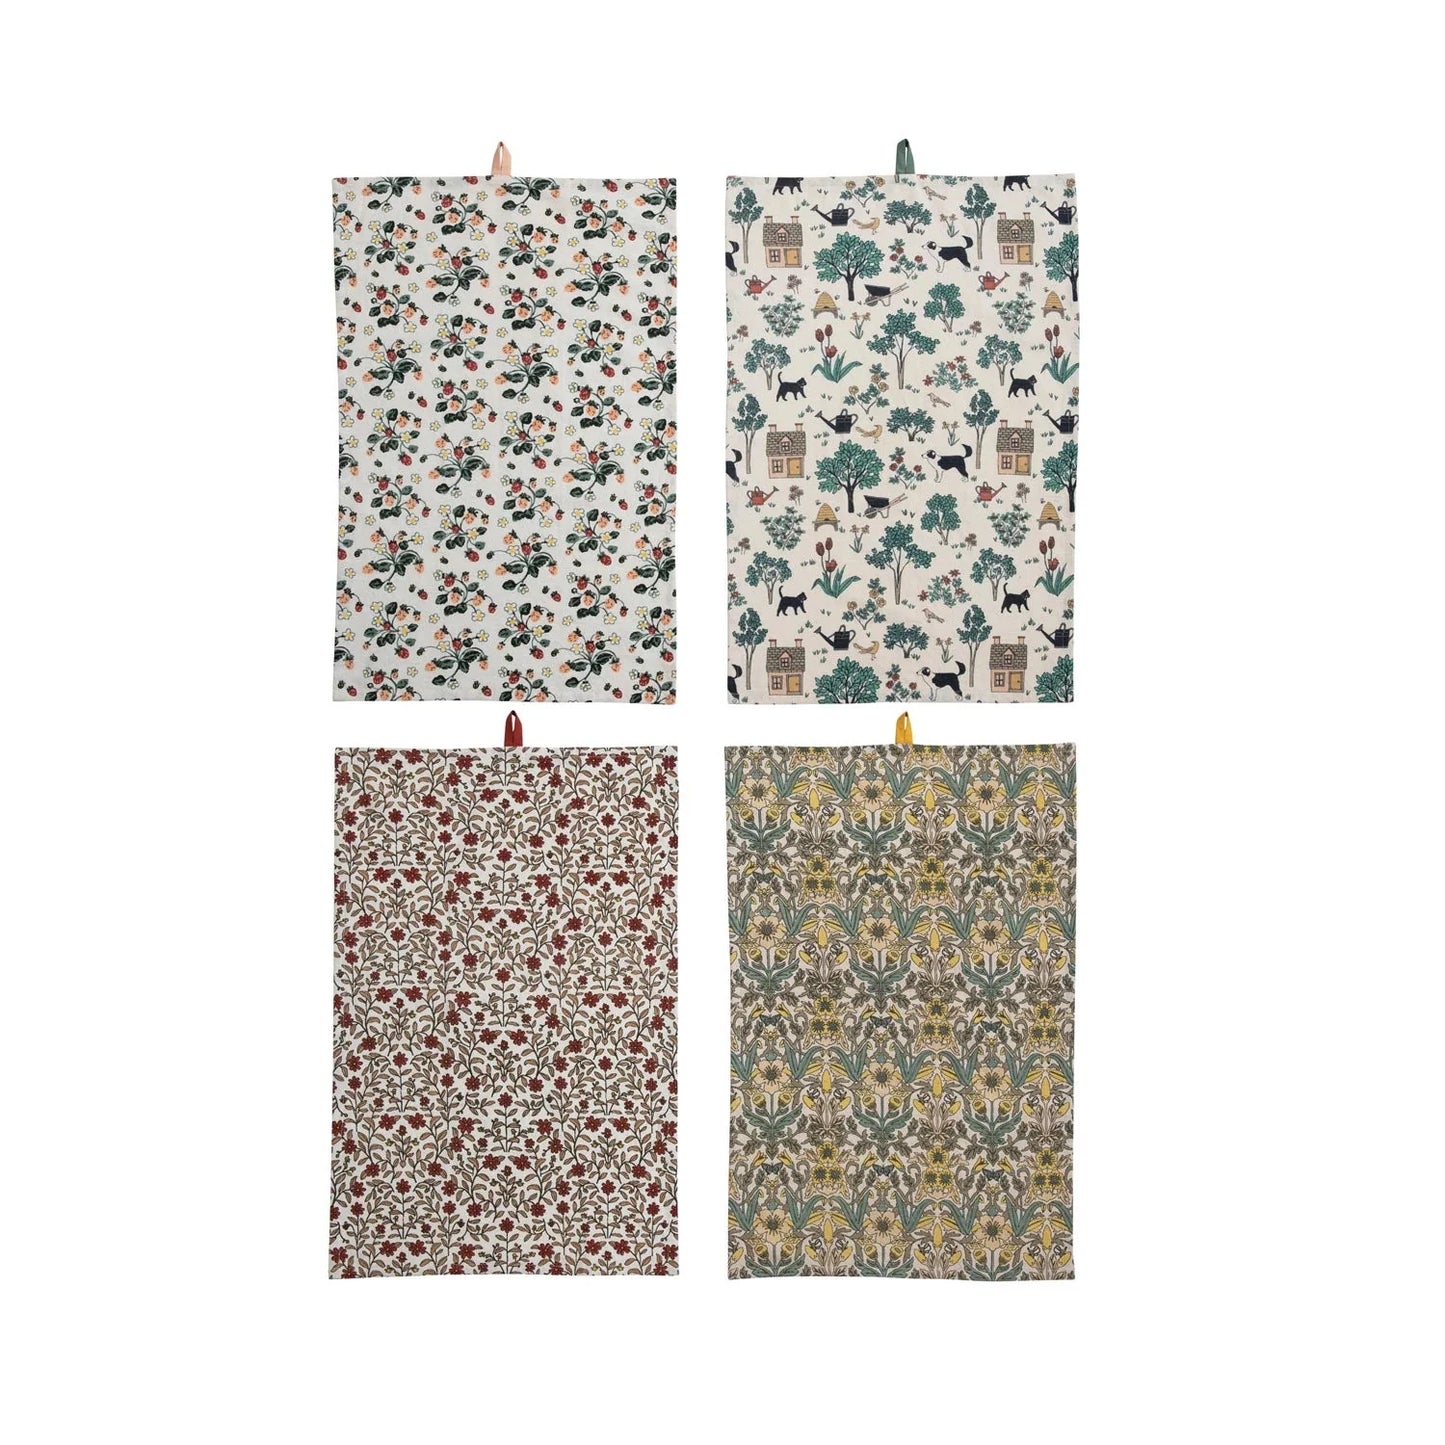 Printed Tea Towels with Pattern - The Riviera Towel Company